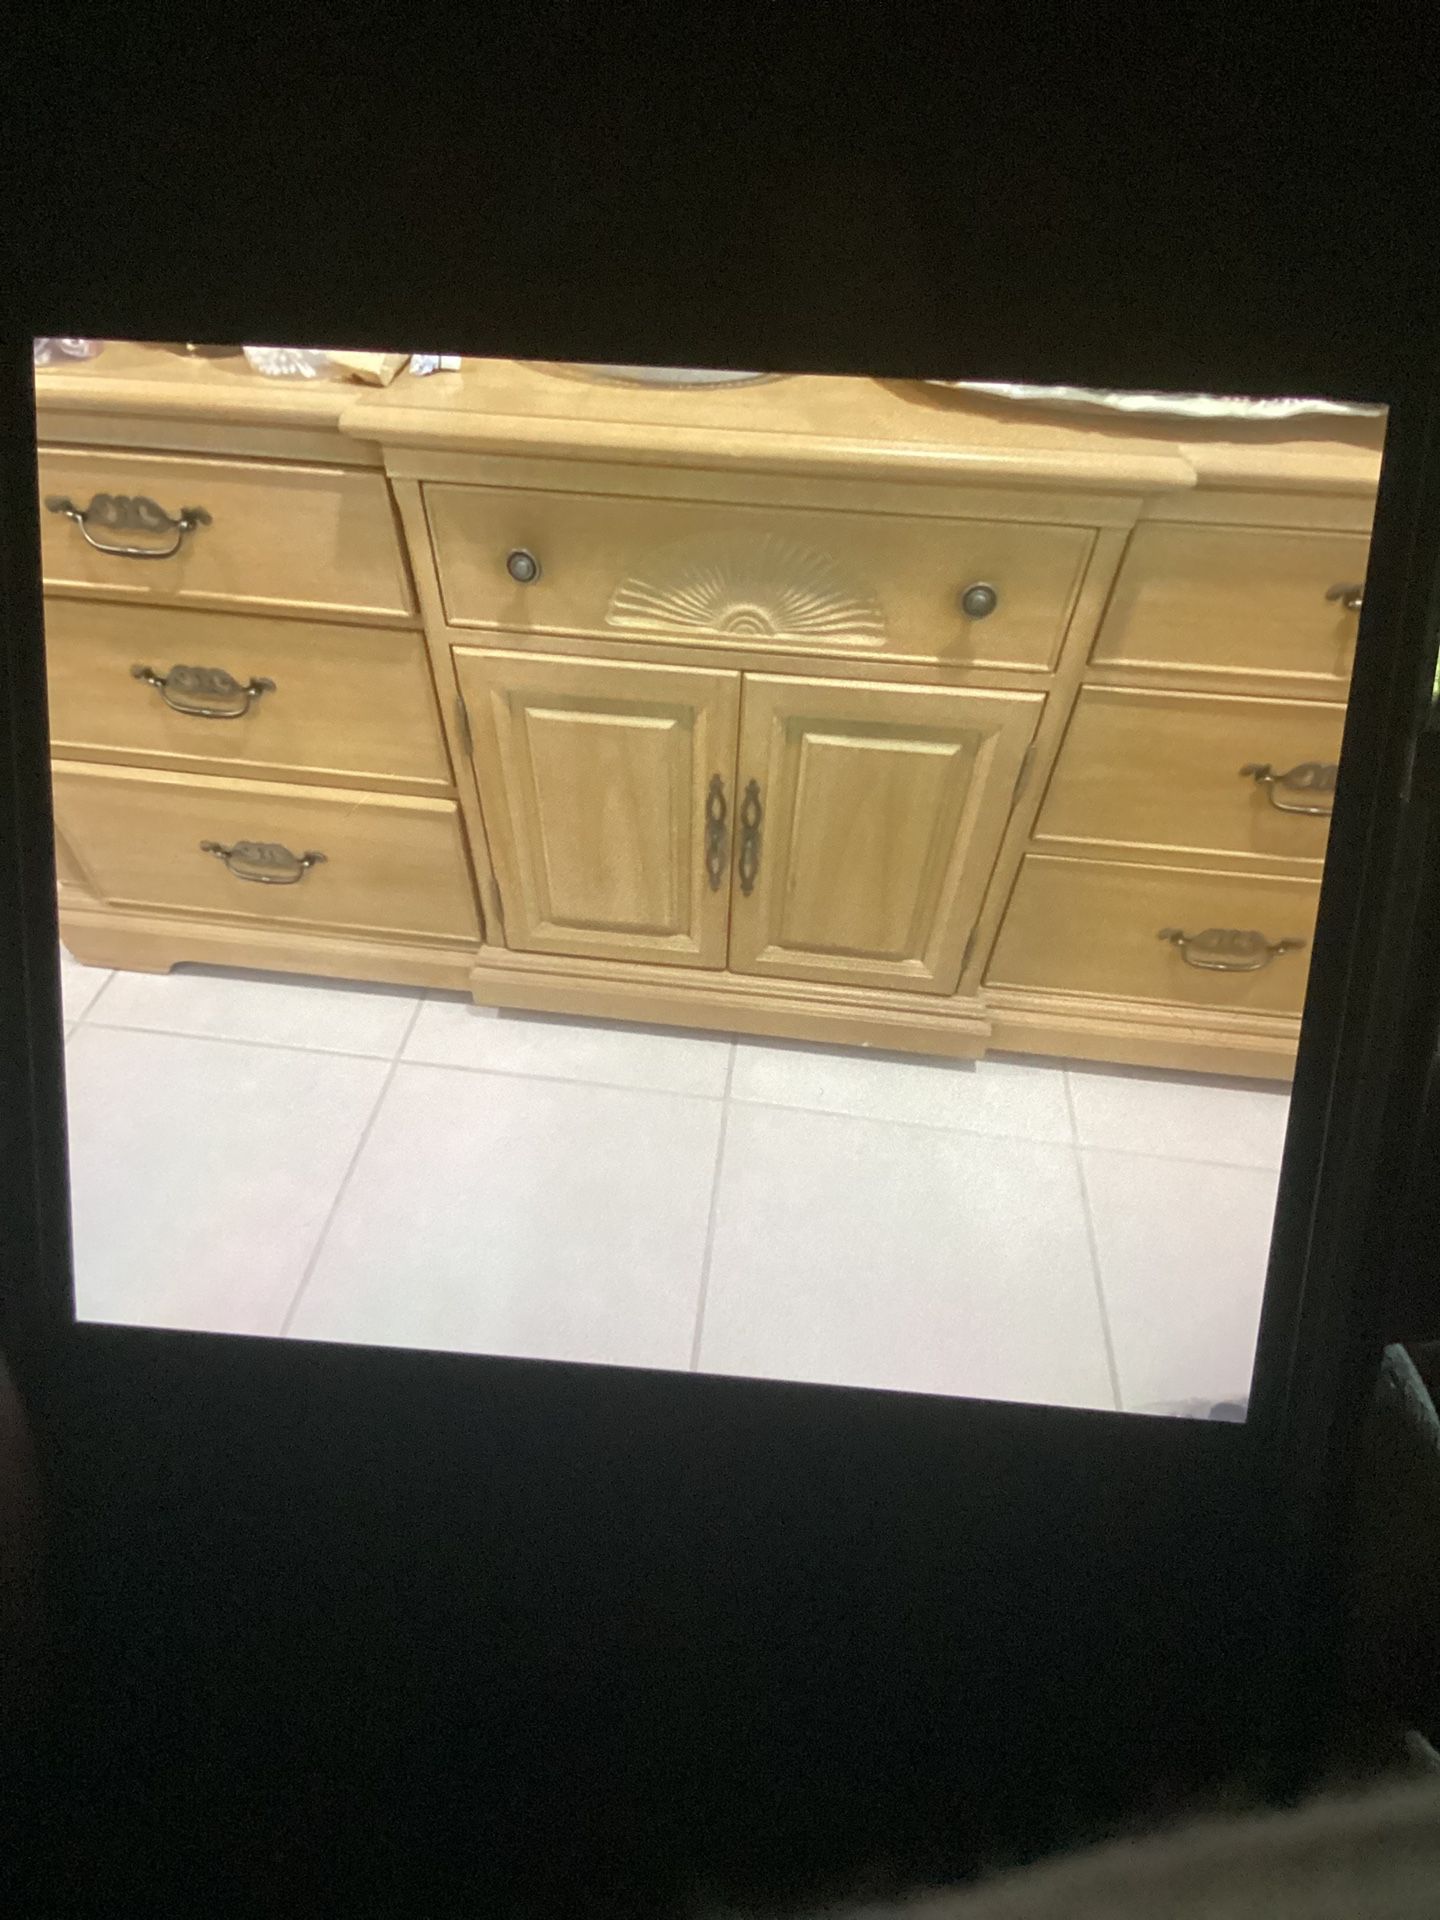 Bernhardt Collection Tripled Dresser 9 Drawers With 2 End Tables Asking $980. Obo Today 